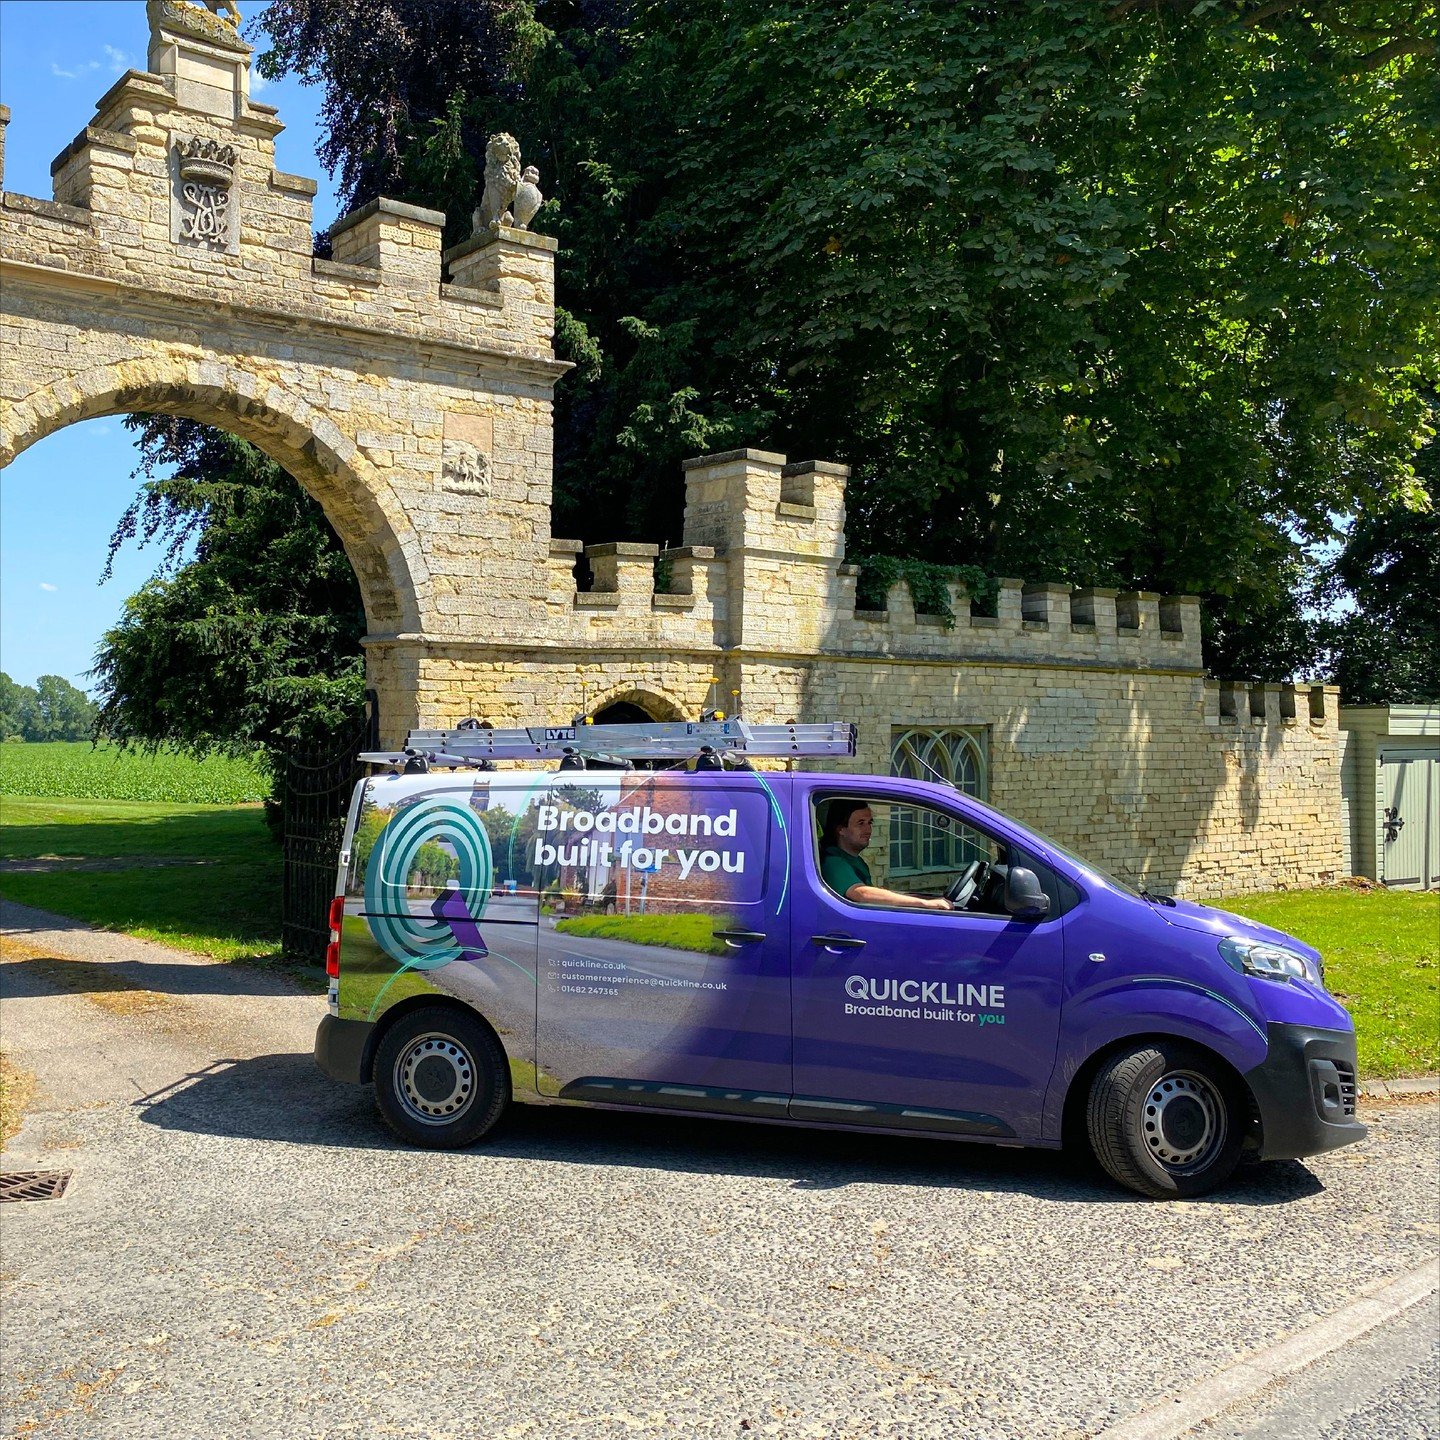 Presenting one of the many vehicle wraps we've completed for our friends at Quickline! 🚐

We're proud to be part of their fleet transformation! 🤩